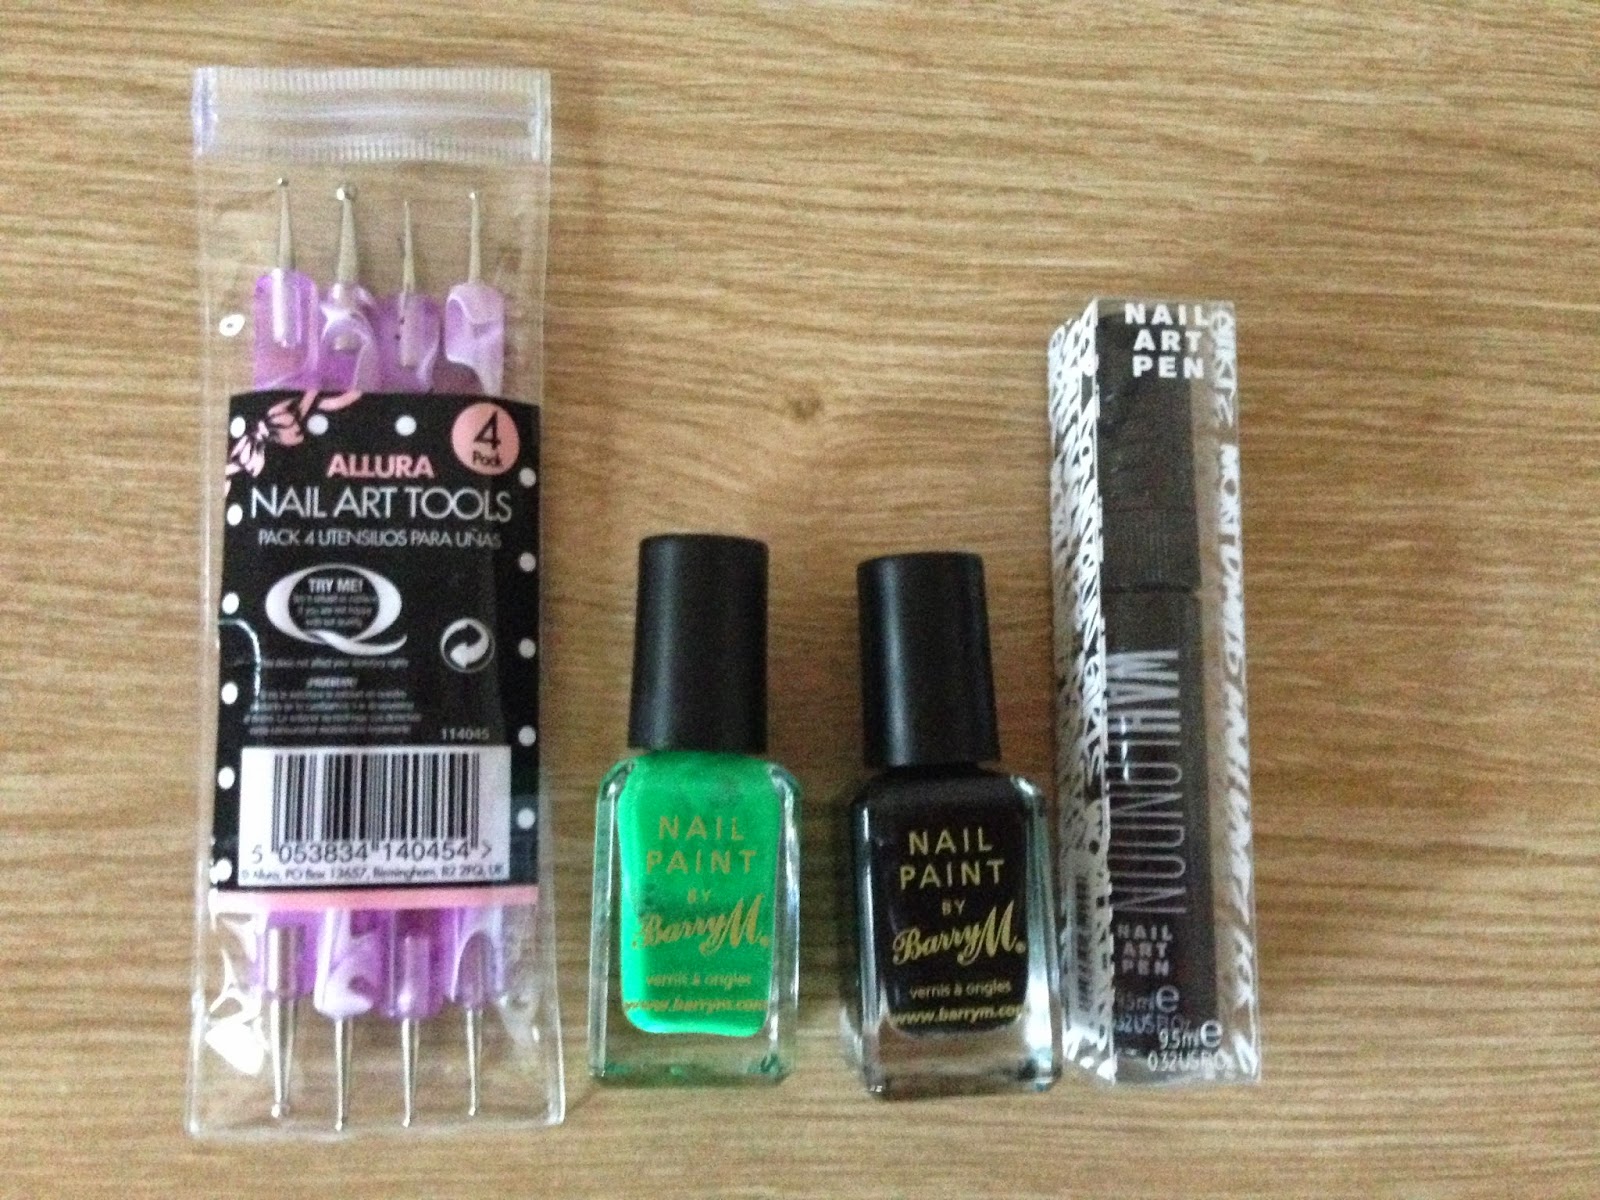 3 recent nail looks - Love Leah